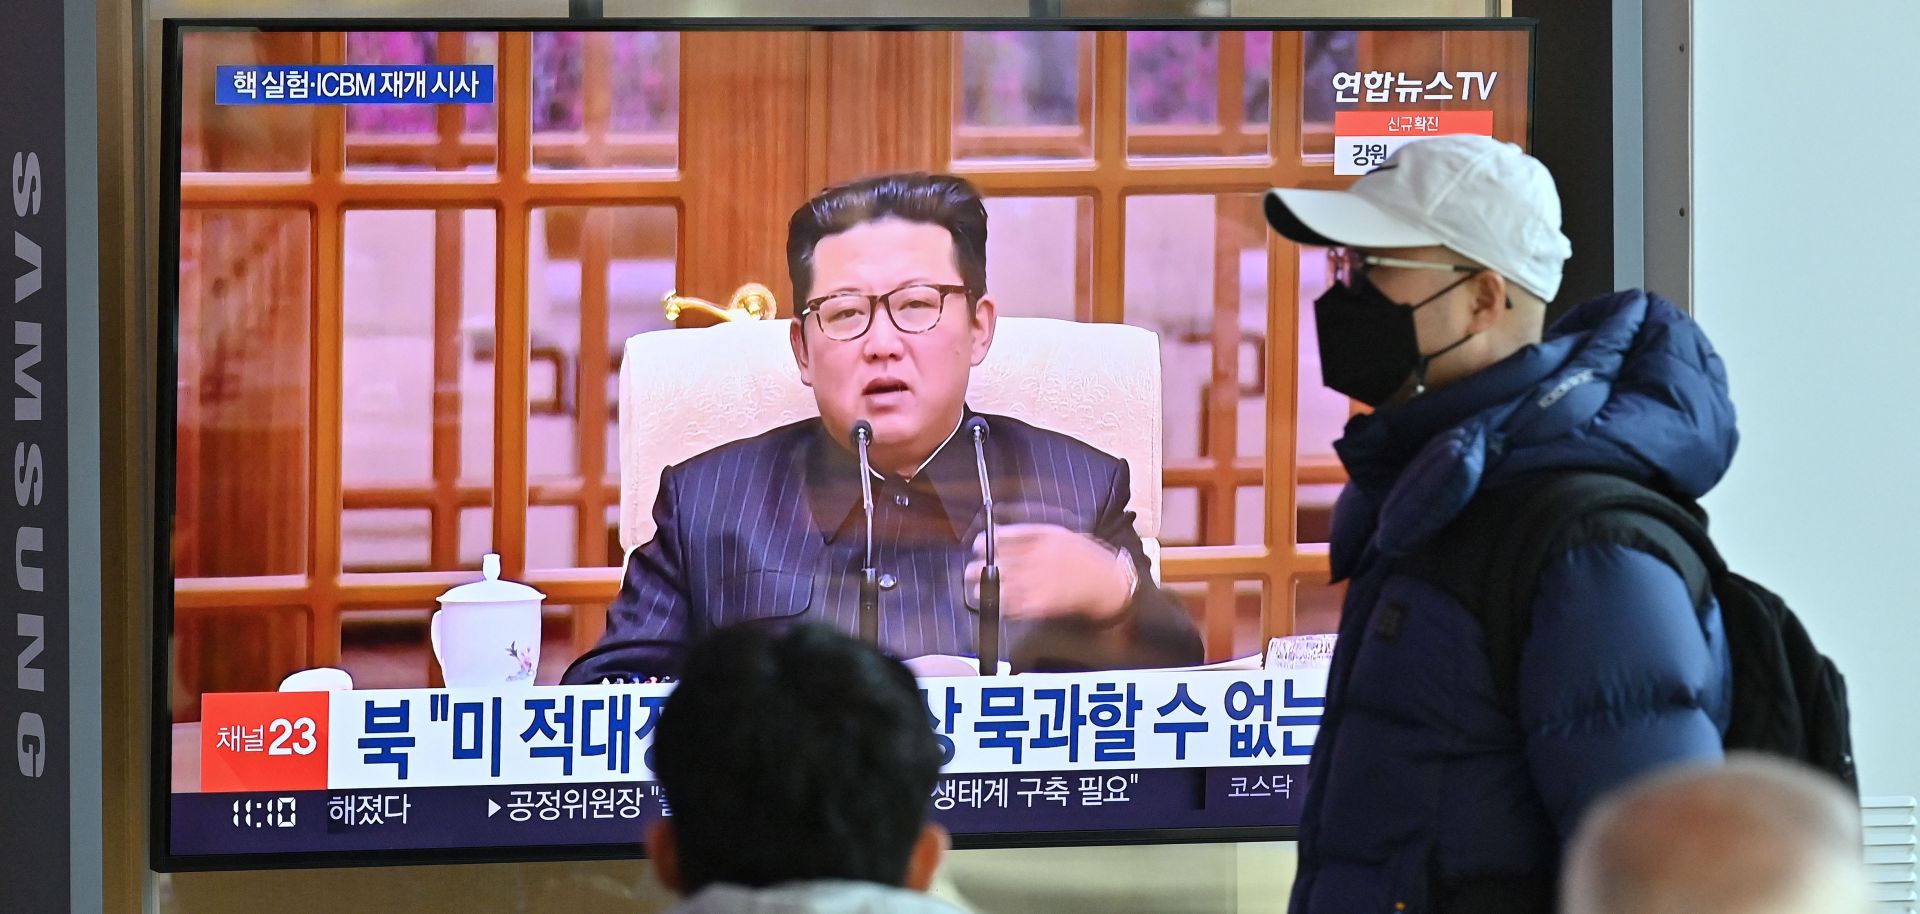 People watch a television screen showing a news broadcast with file footage of North Korean leader Kim Jong Un, at a railway station in Seoul, South Korea, on Jan. 20, 2022, after North Korea hinted it could resume nuclear and long-range weapons tests. 